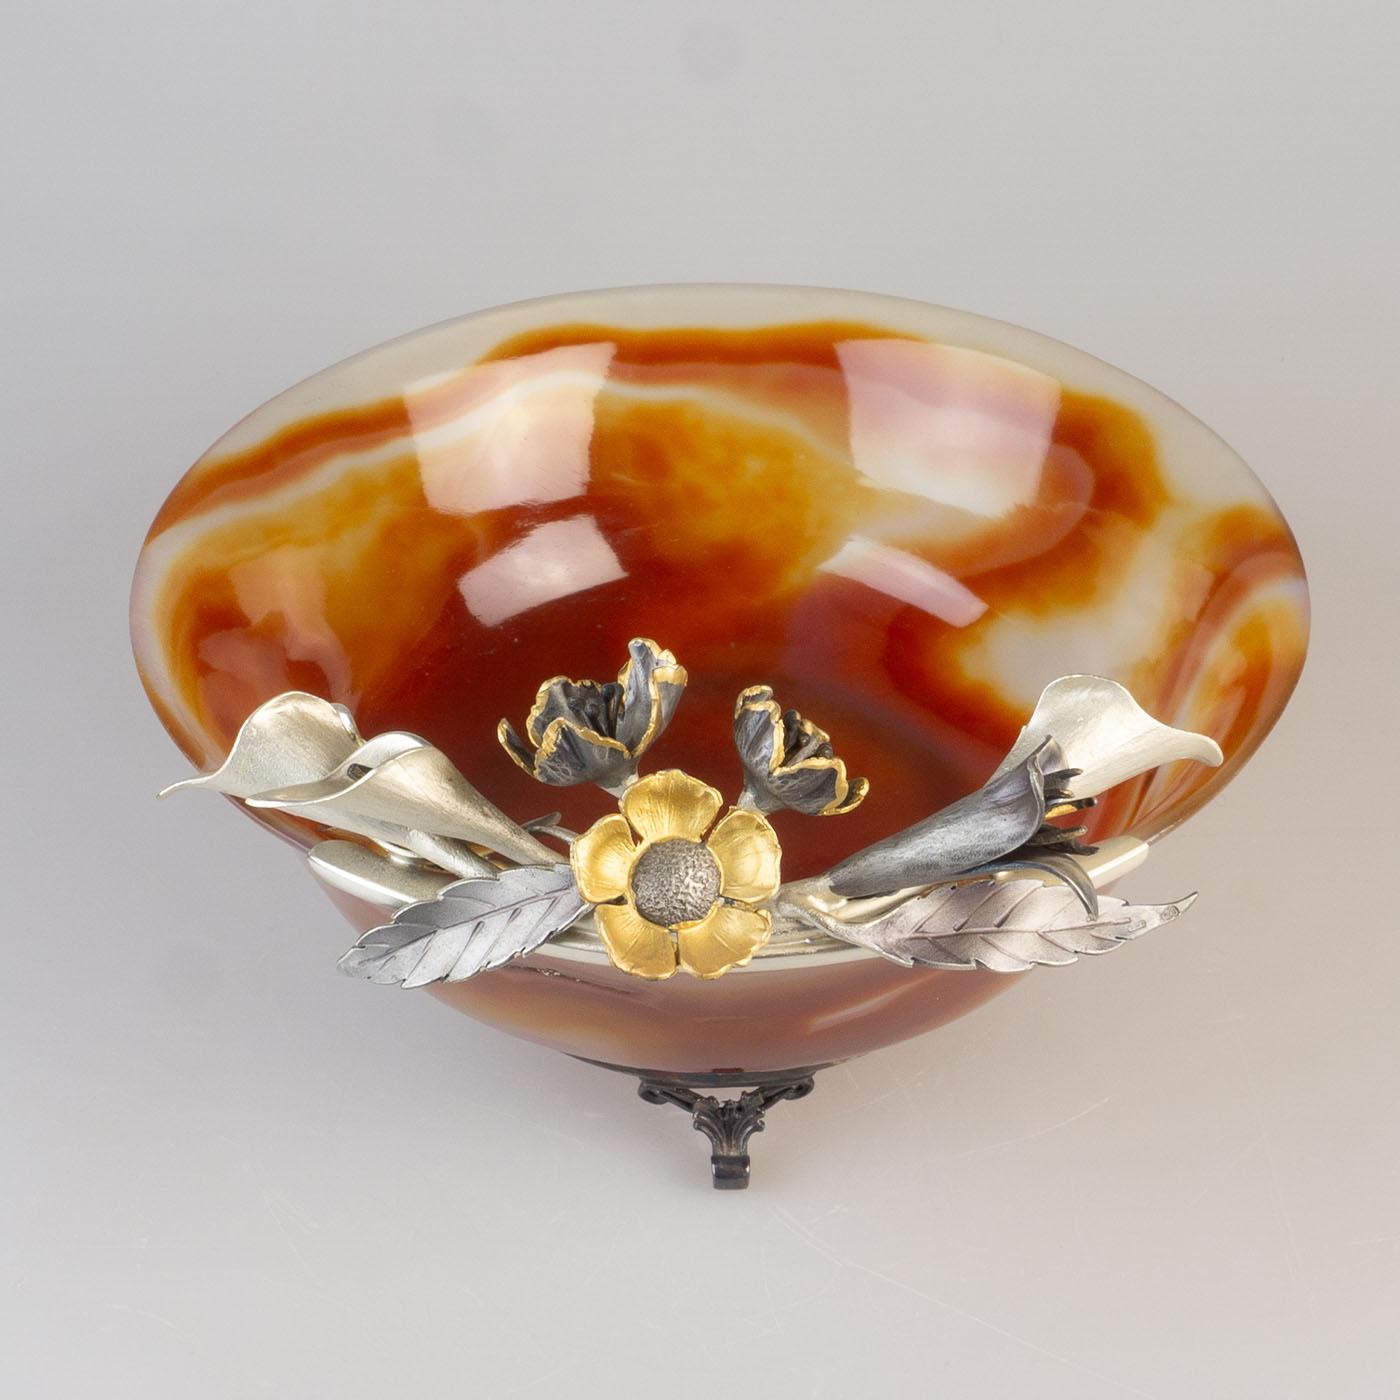 Stone Carnelian Agate and Antique Silver Vide Poches